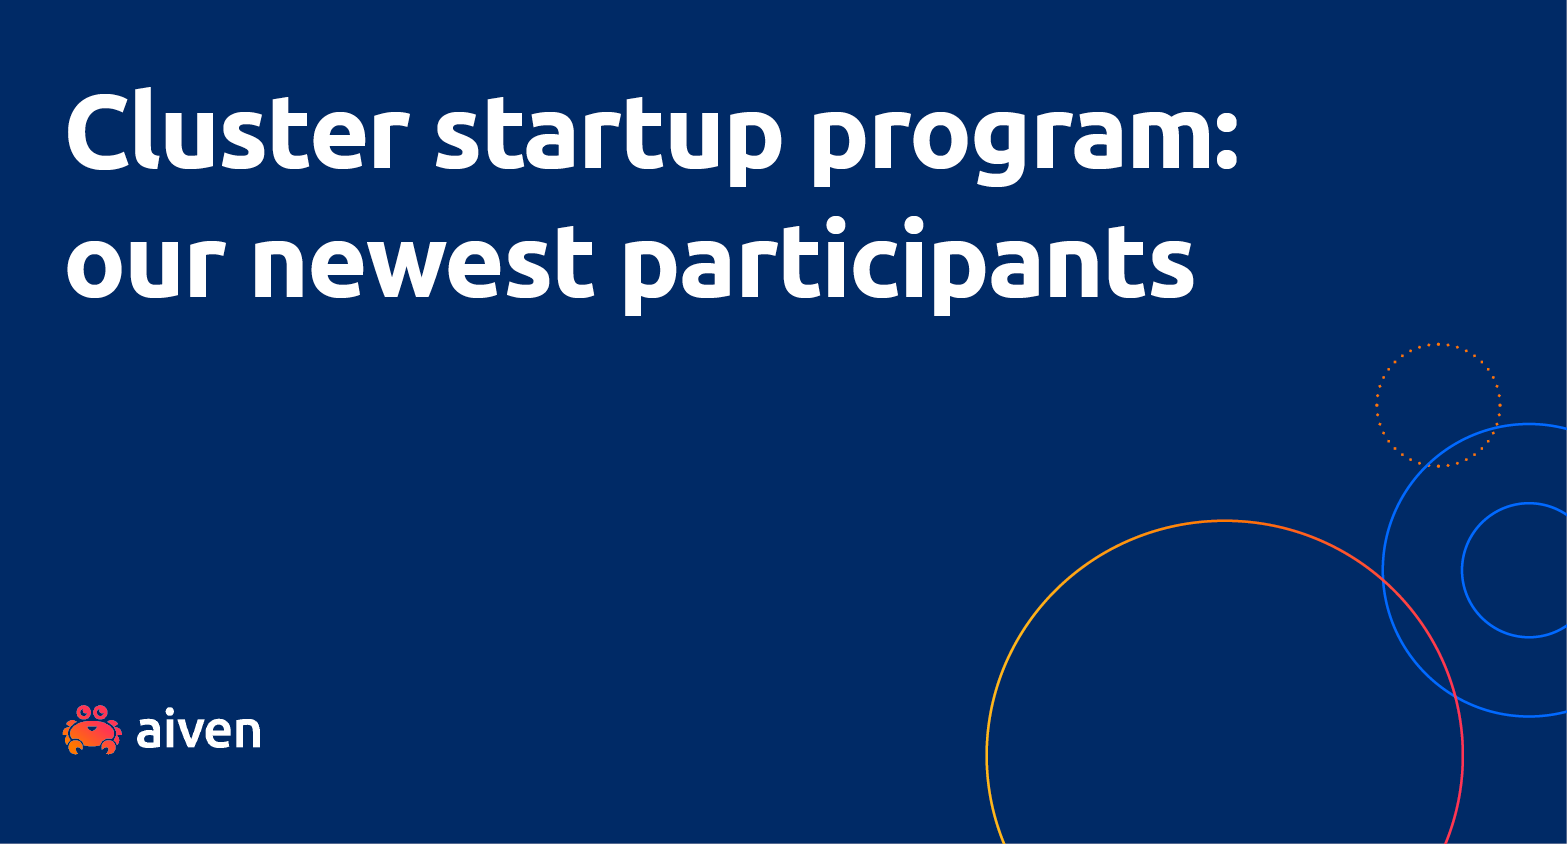 The words "Cluster startup program: our newest participants" on a blue background, with the Aiven cuddly crab logo at the bottom left